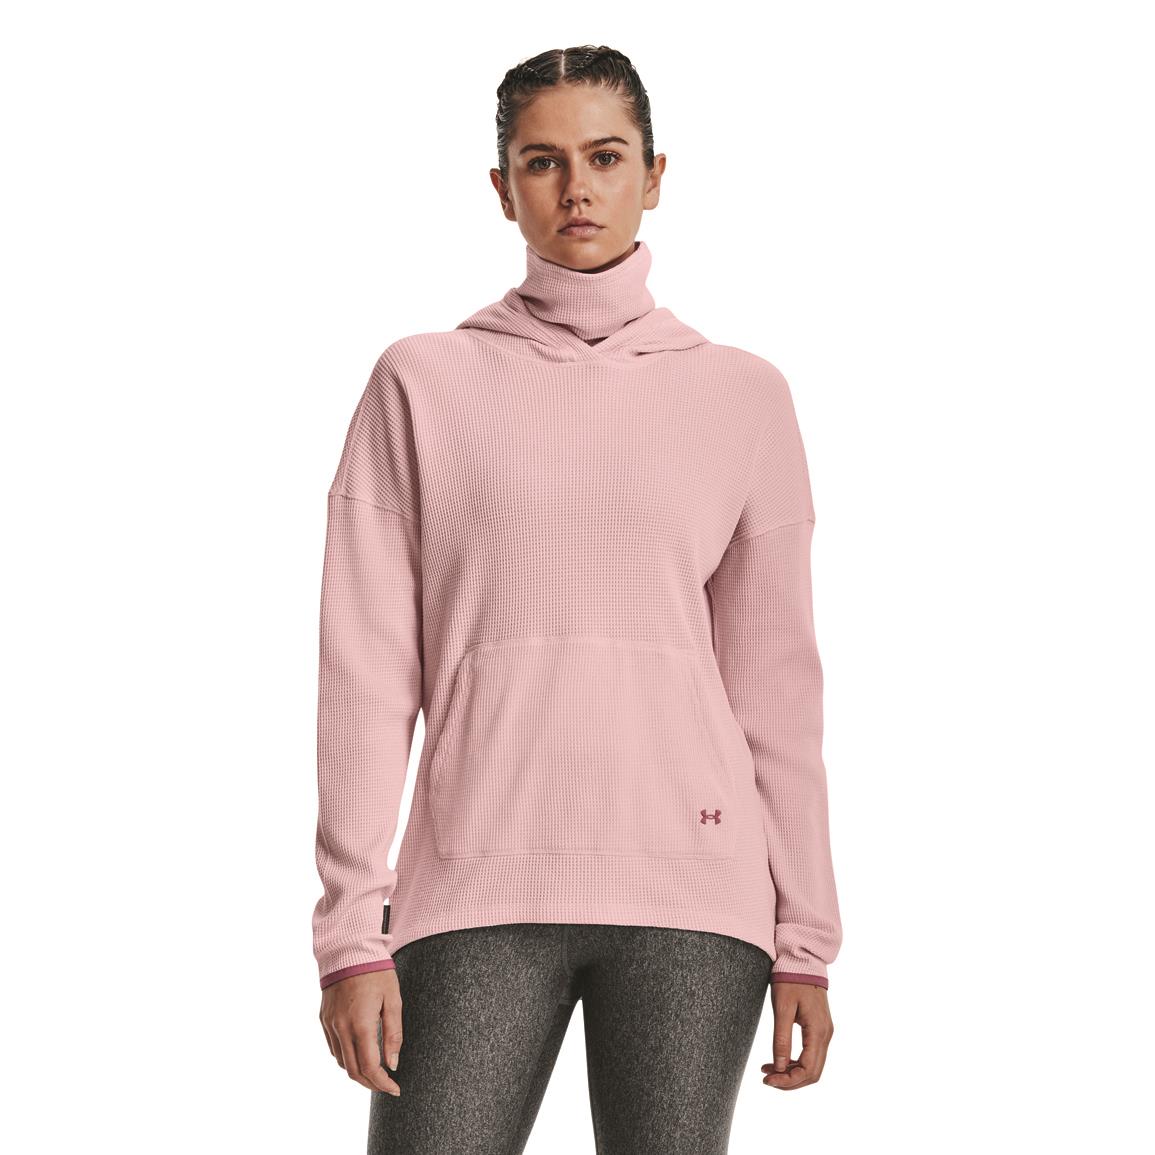 Under Armour Women's Waffle Funnel Hoodie, Prime Pink